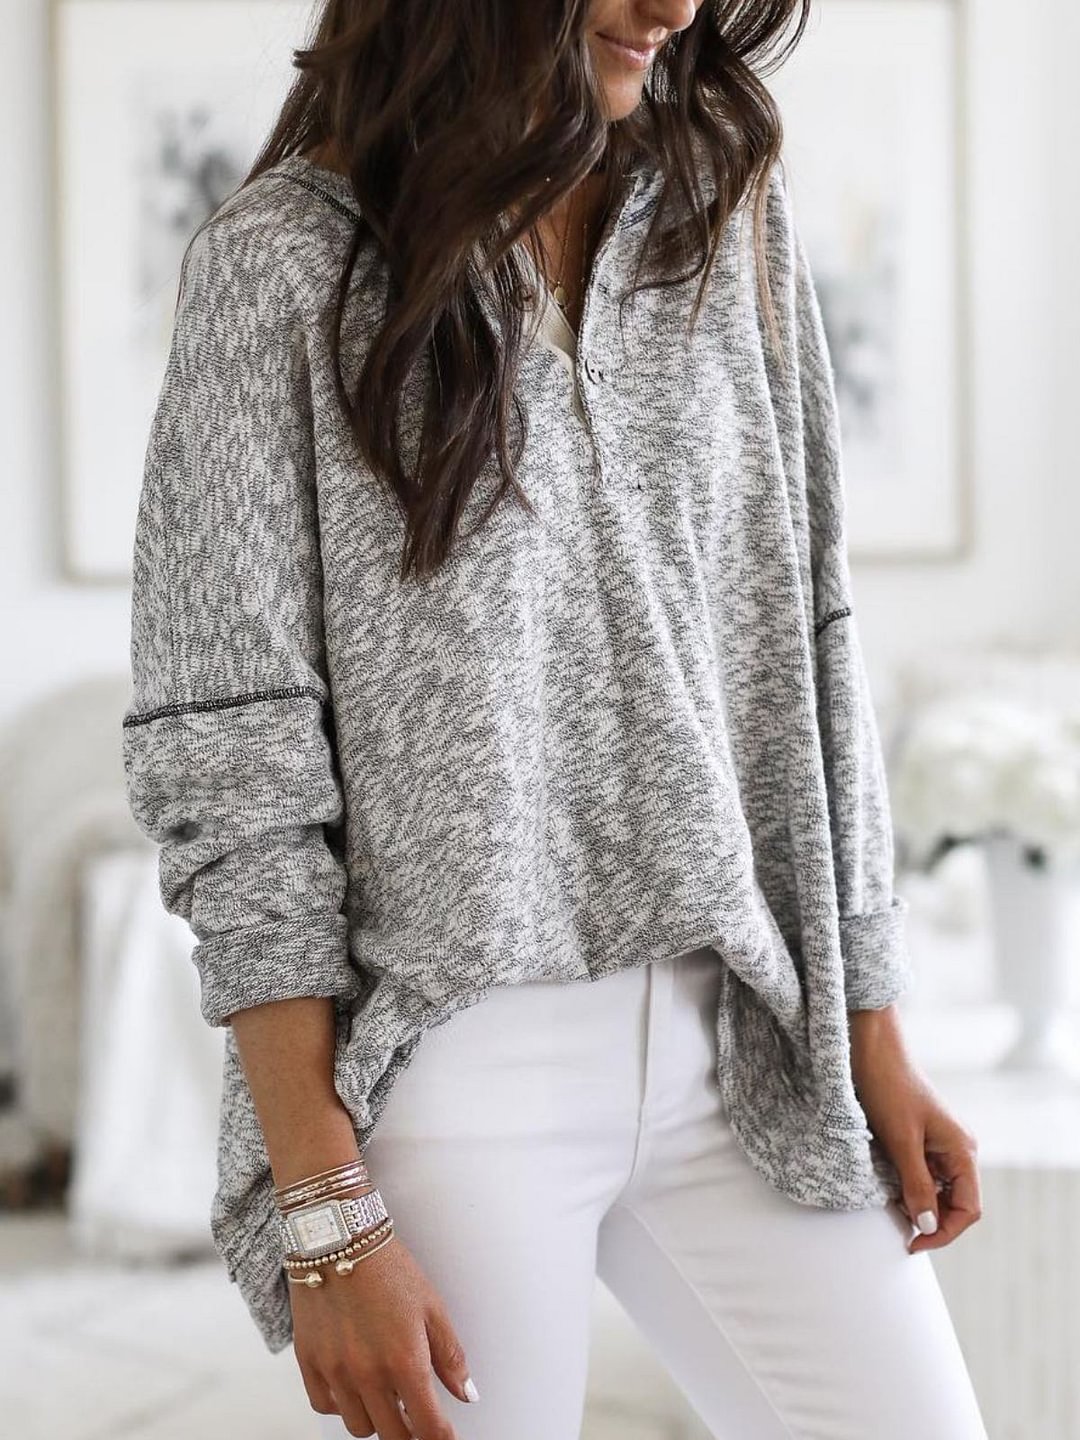 Plus Size Casual V Neck Long Sleeve Tops